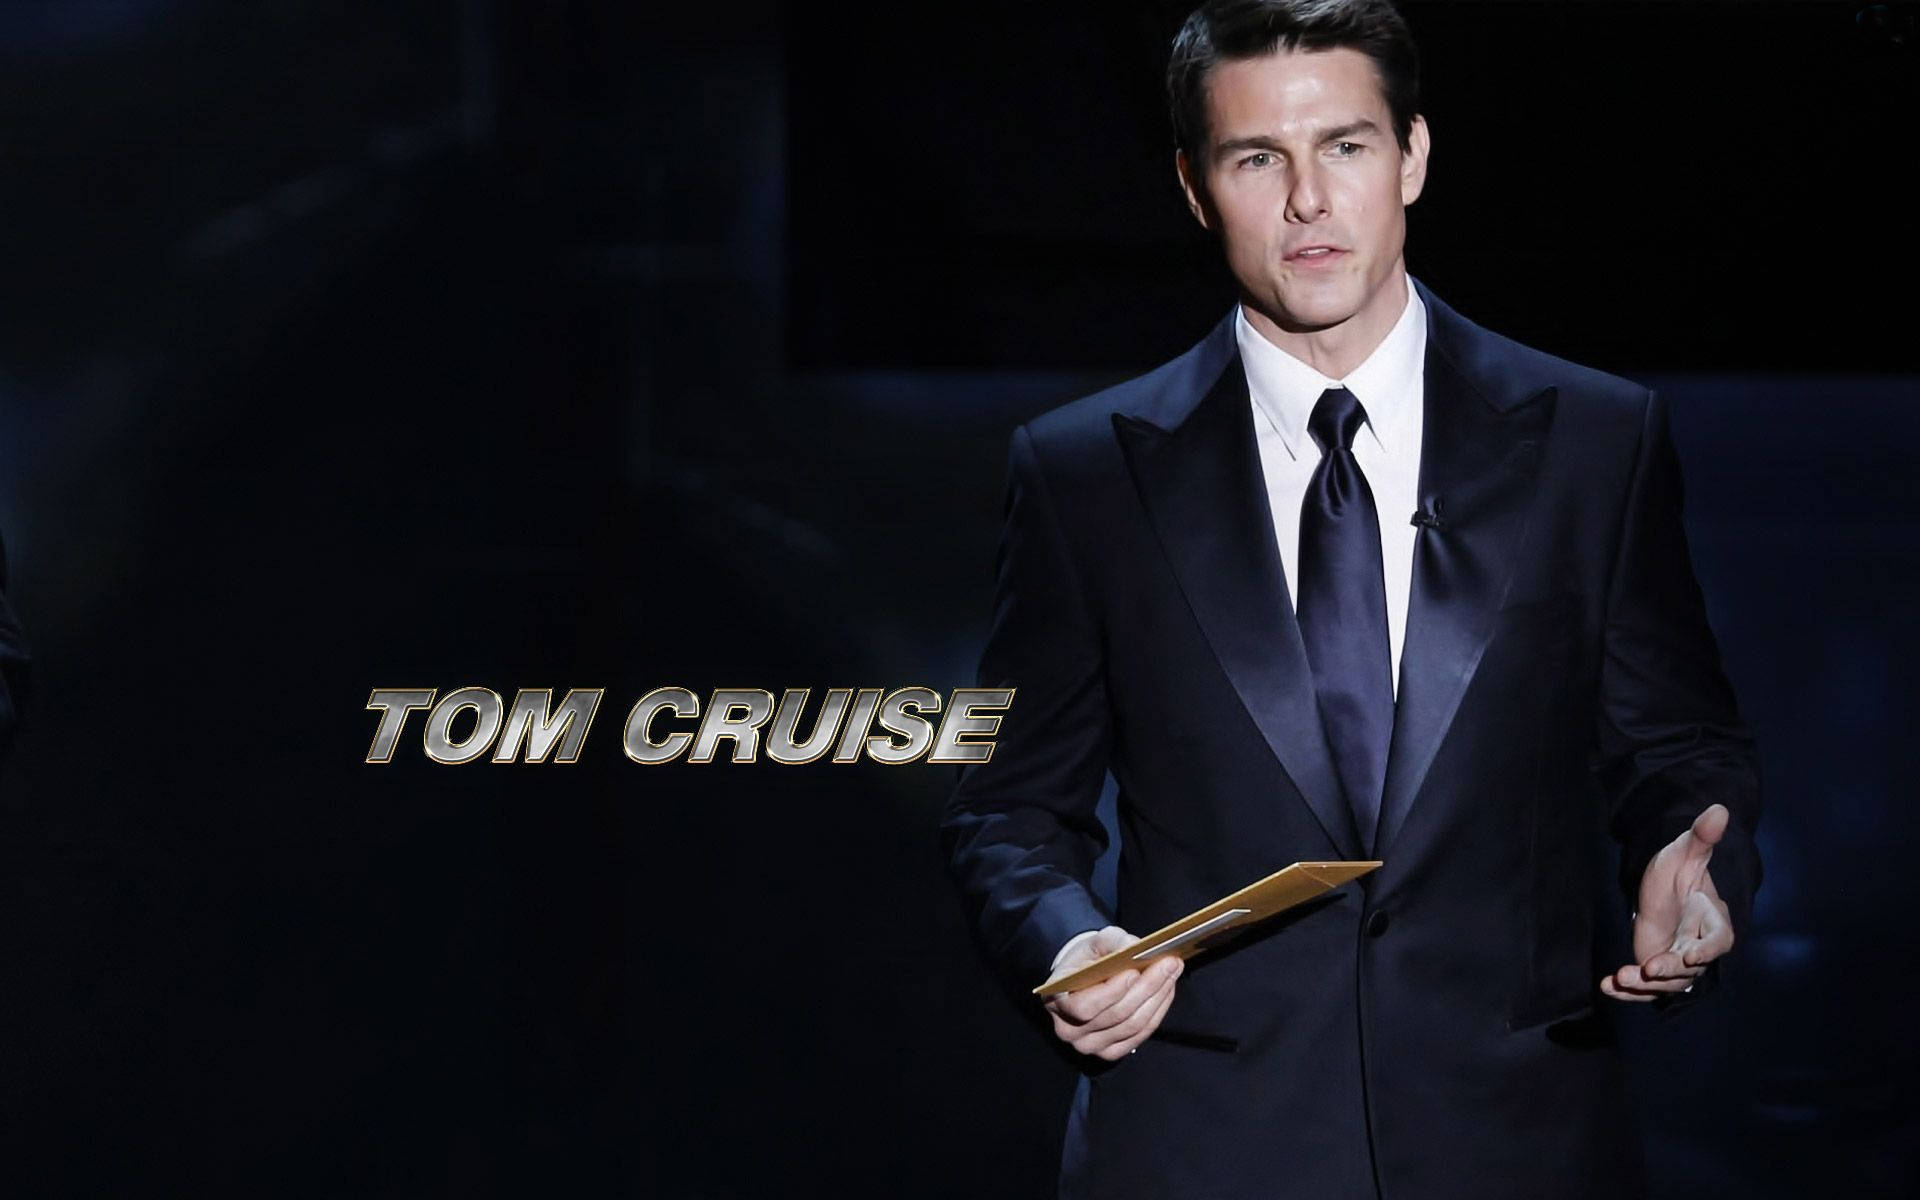 Tom Cruise Wearing Suit Background